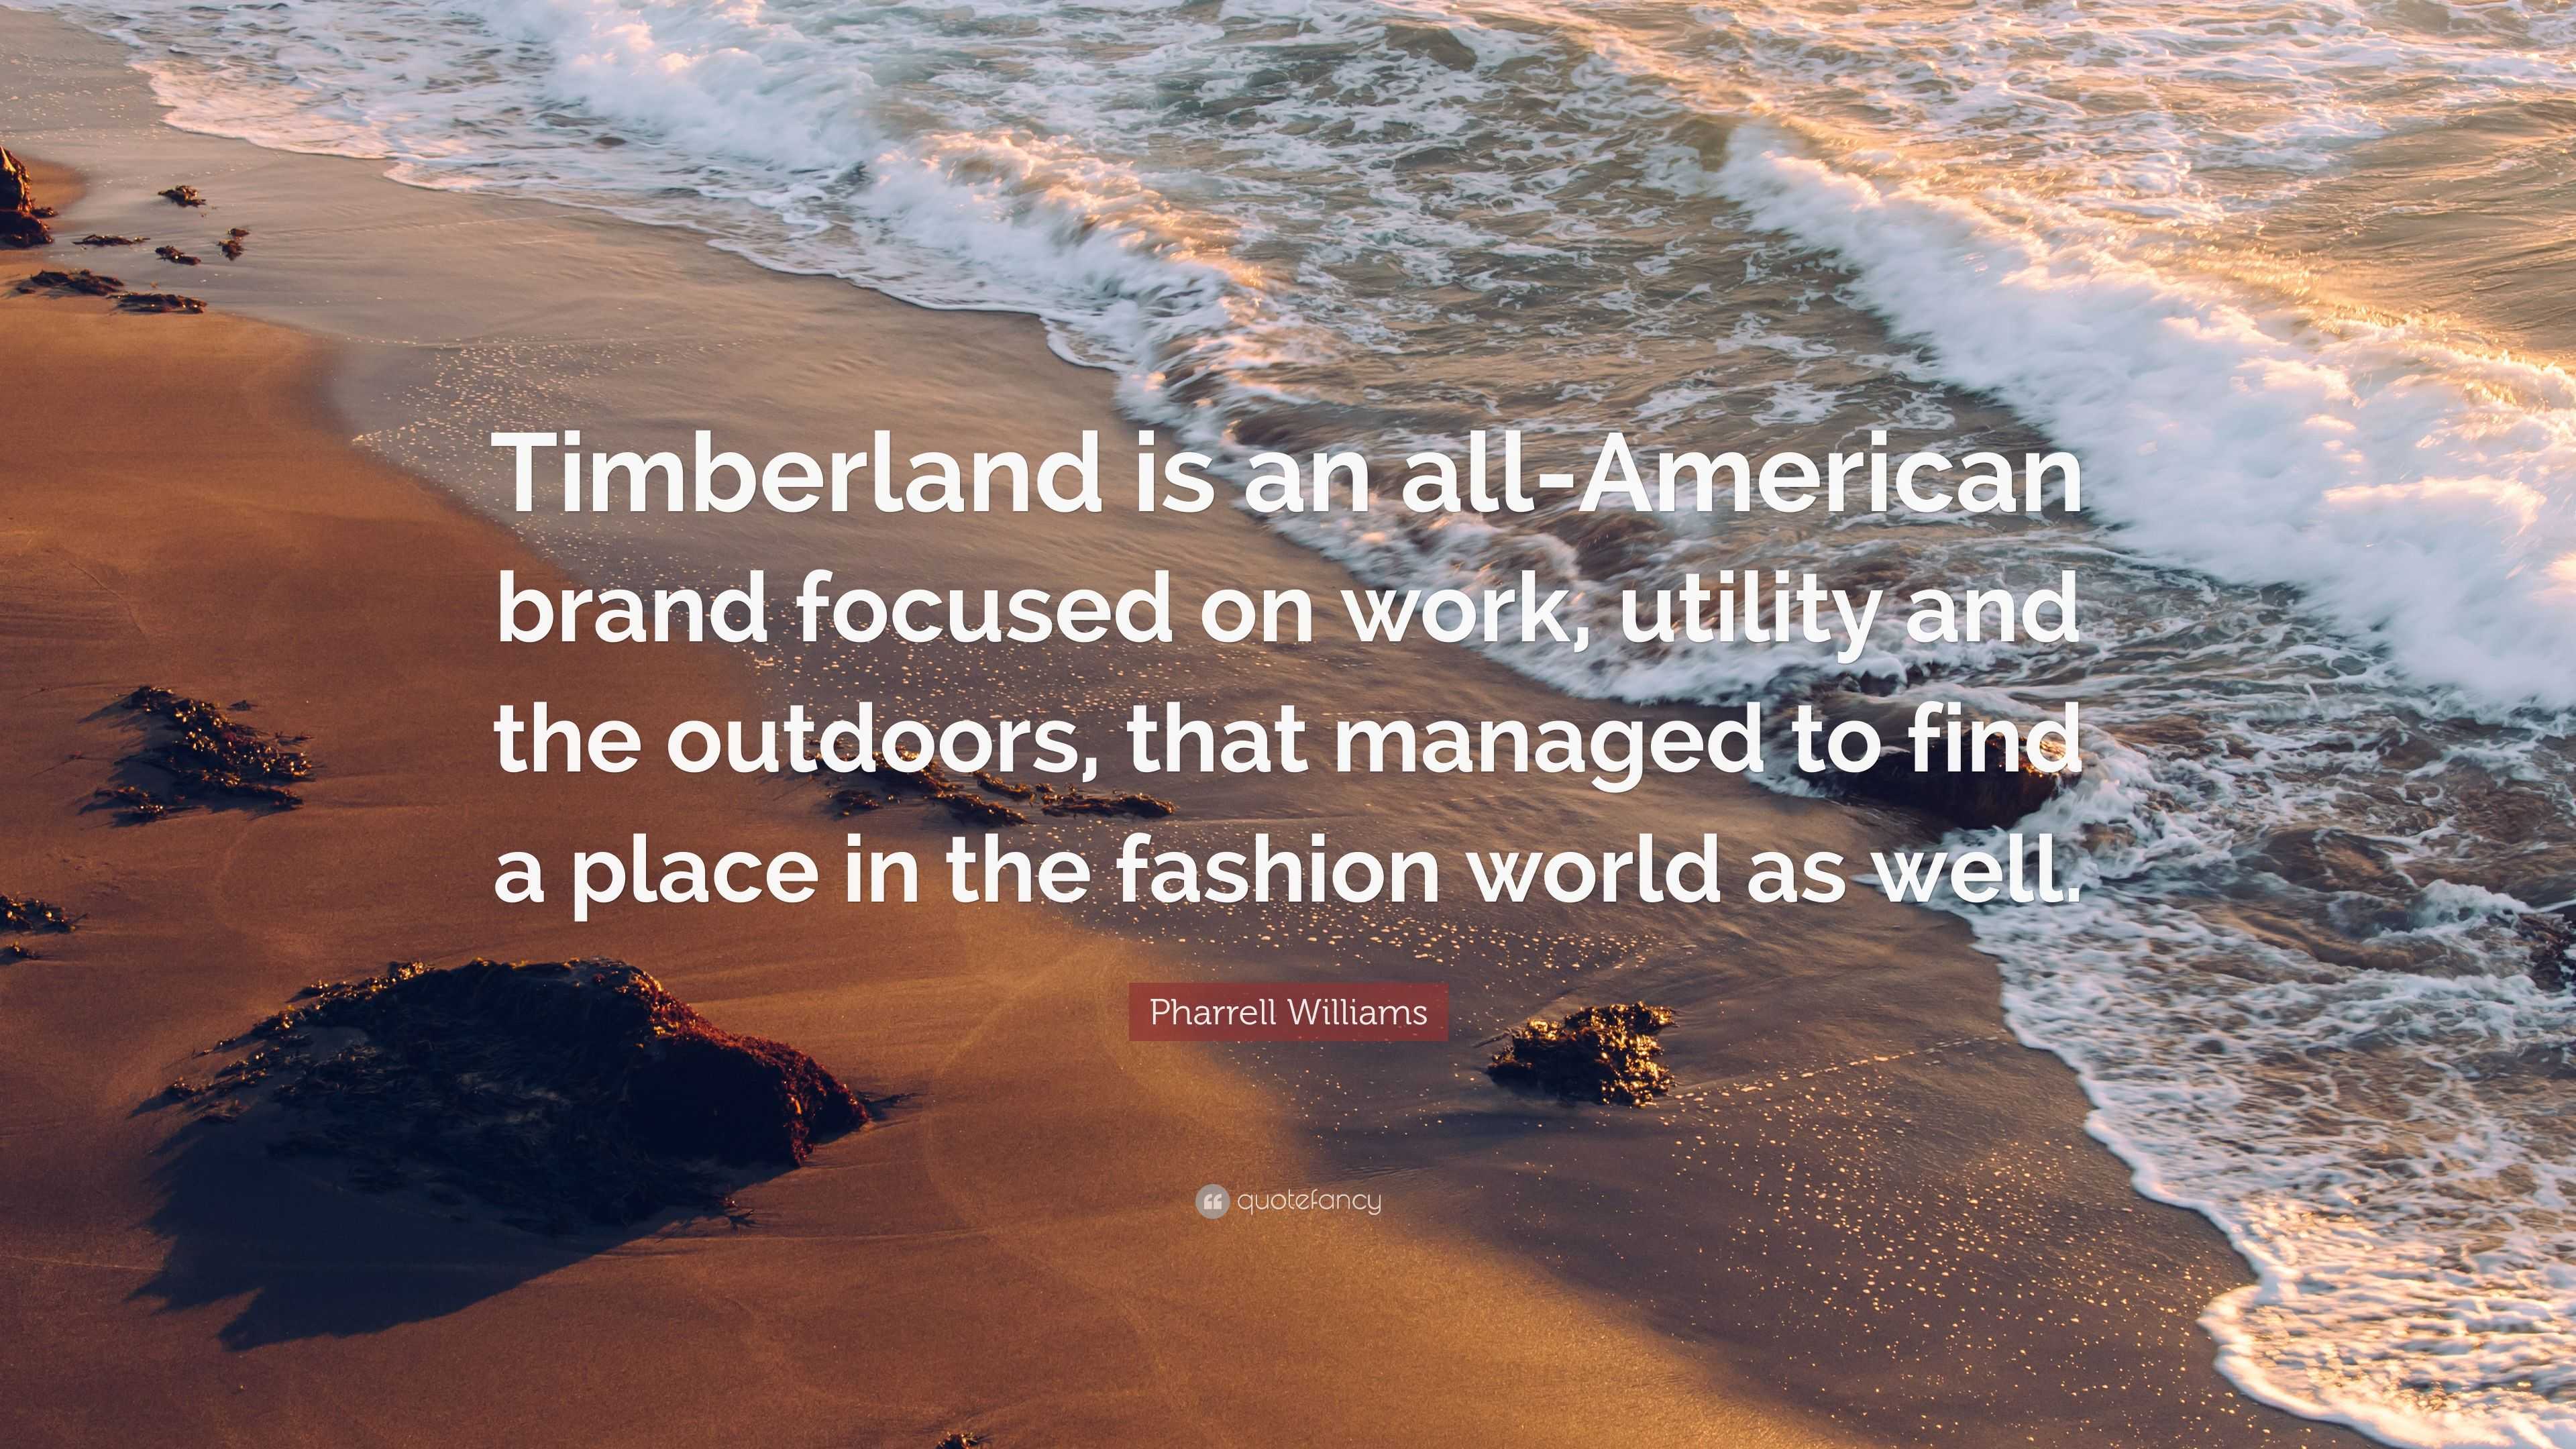 https://quotefancy.com/media/wallpaper/3840x2160/4893276-Pharrell-Williams-Quote-Timberland-is-an-all-American-brand.jpg